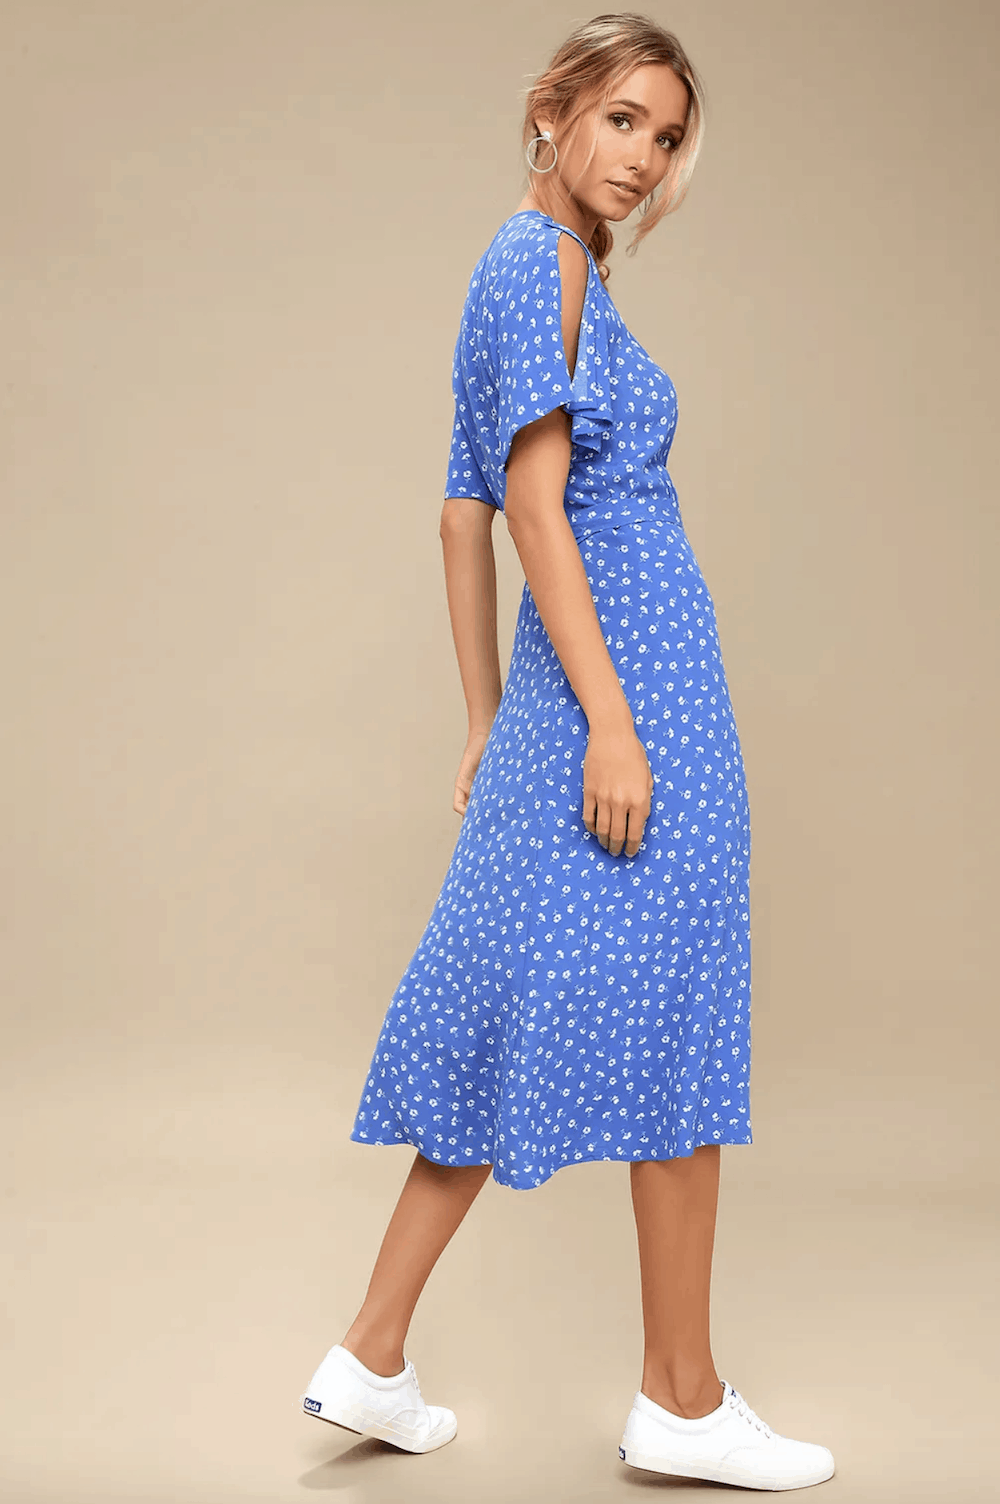 Positano Italy Outfits Cute Dresses Maretta Blue and White Floral Print Wrap Midi Dress Lulus